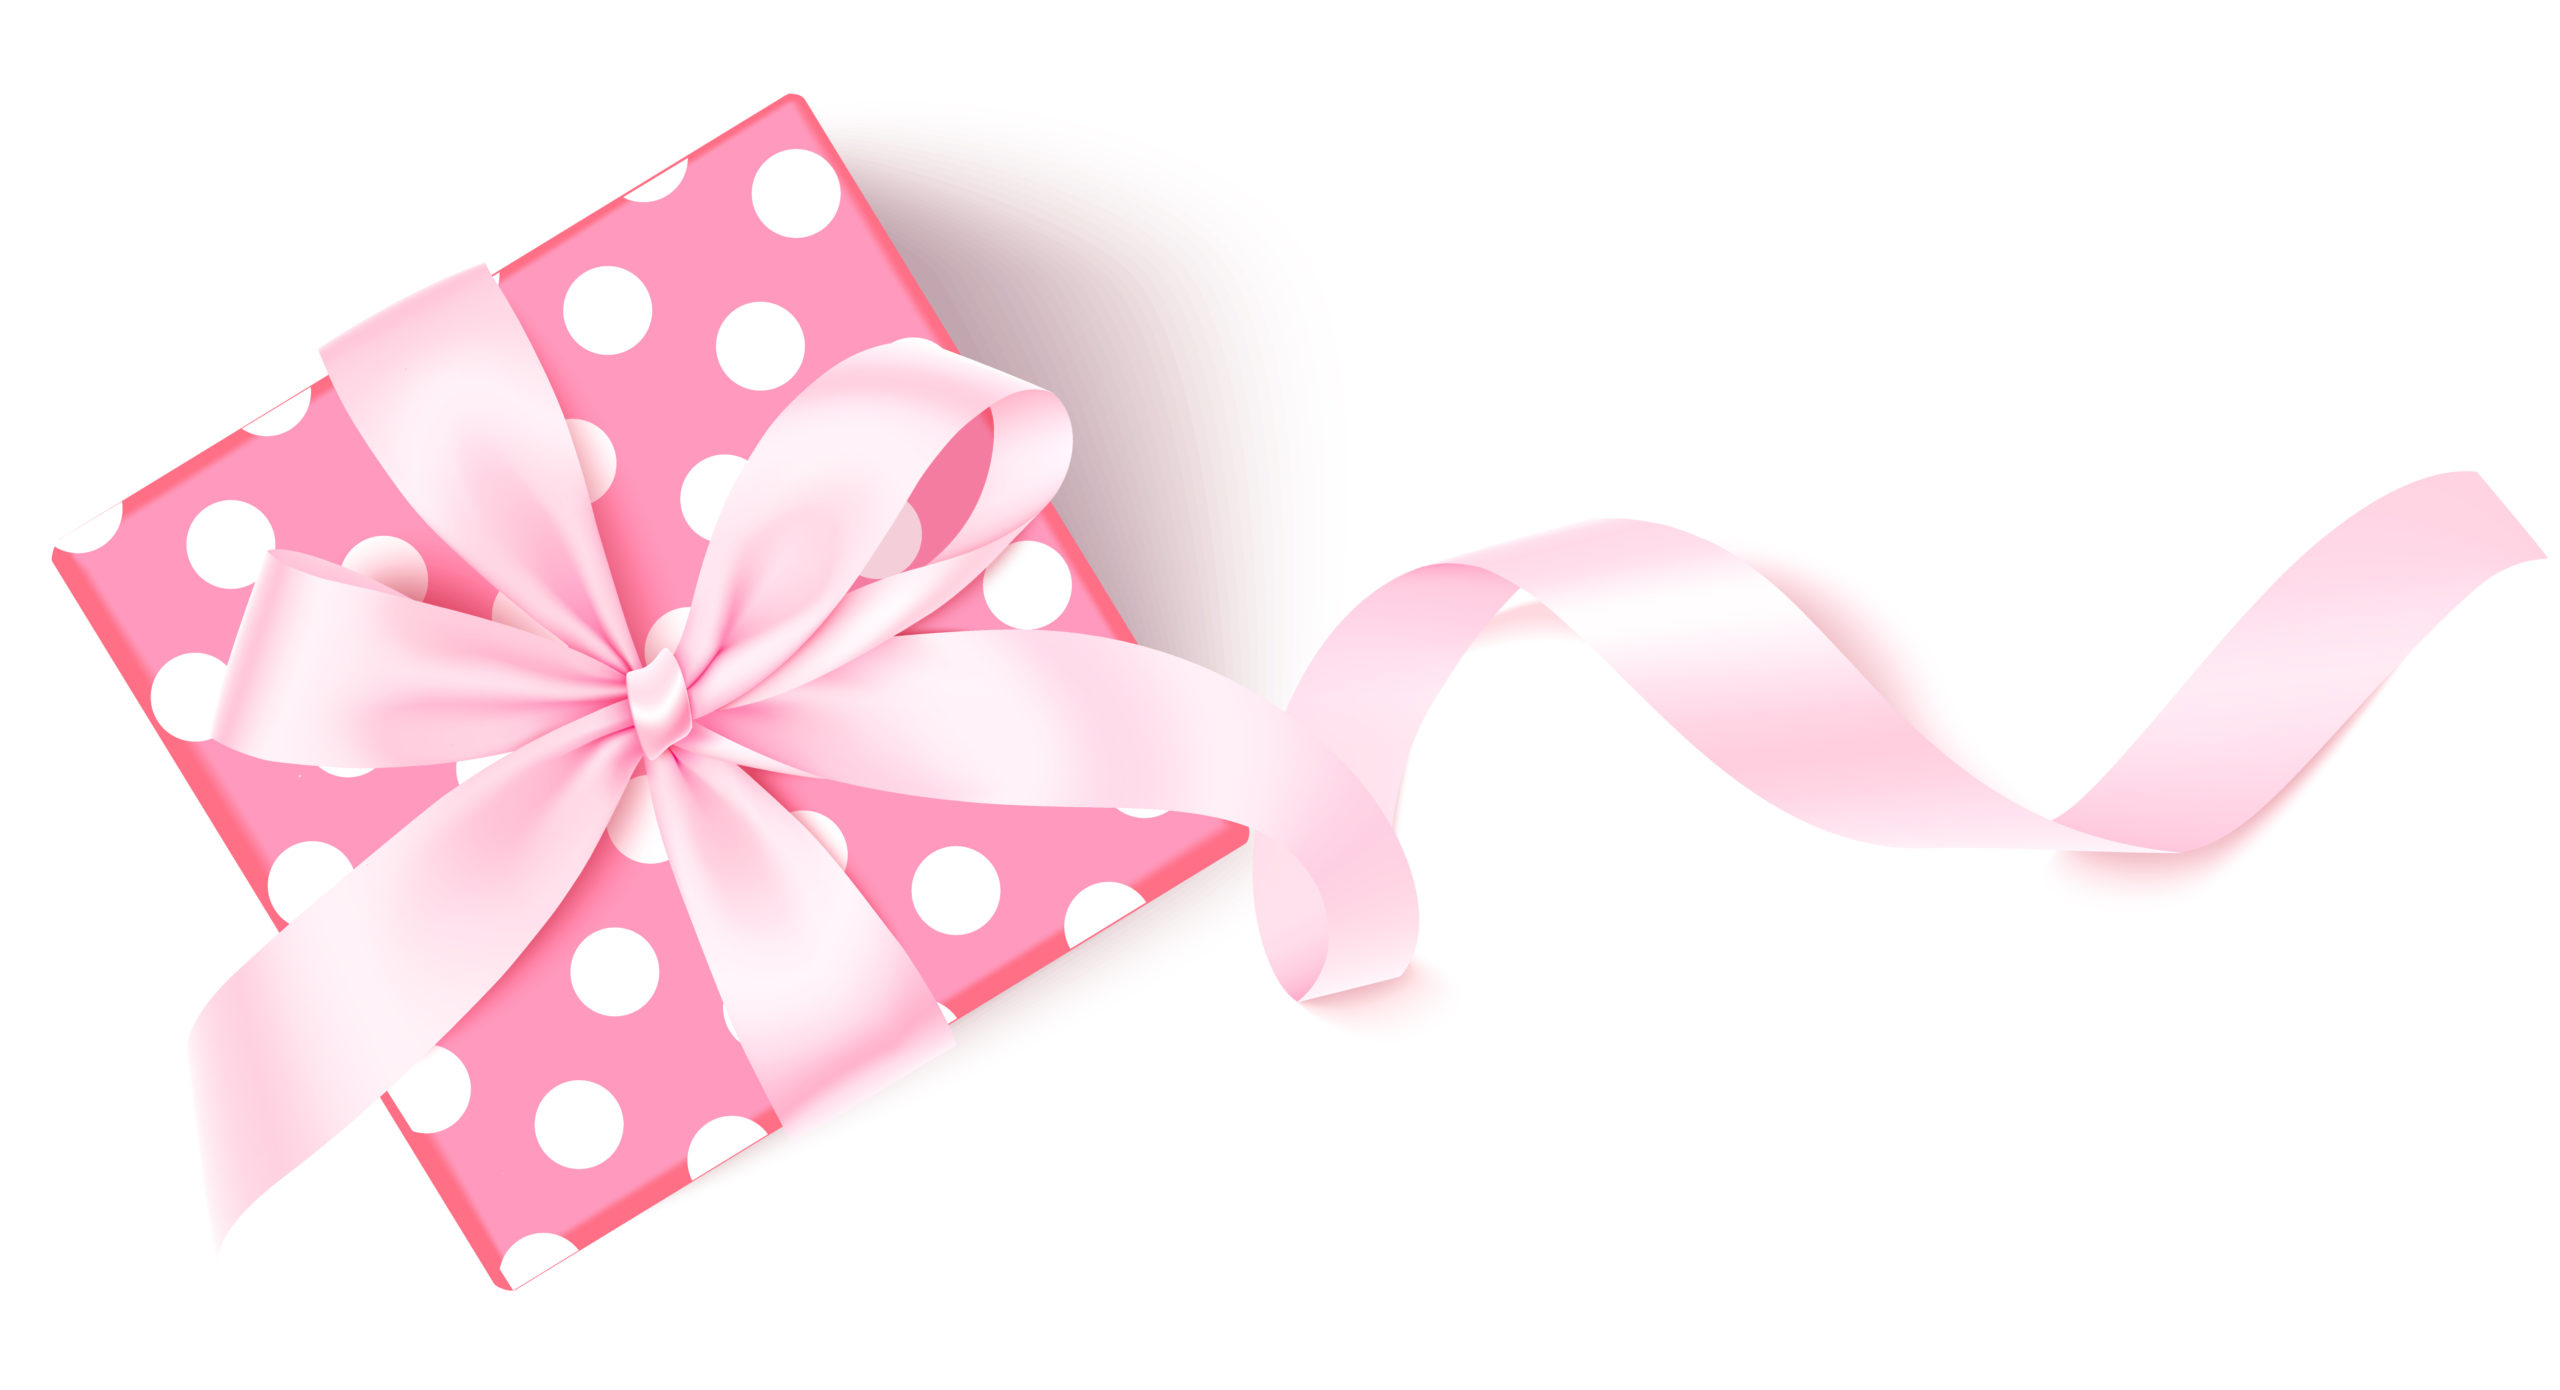 A pink polka dot gift box with a pink ribbon on top